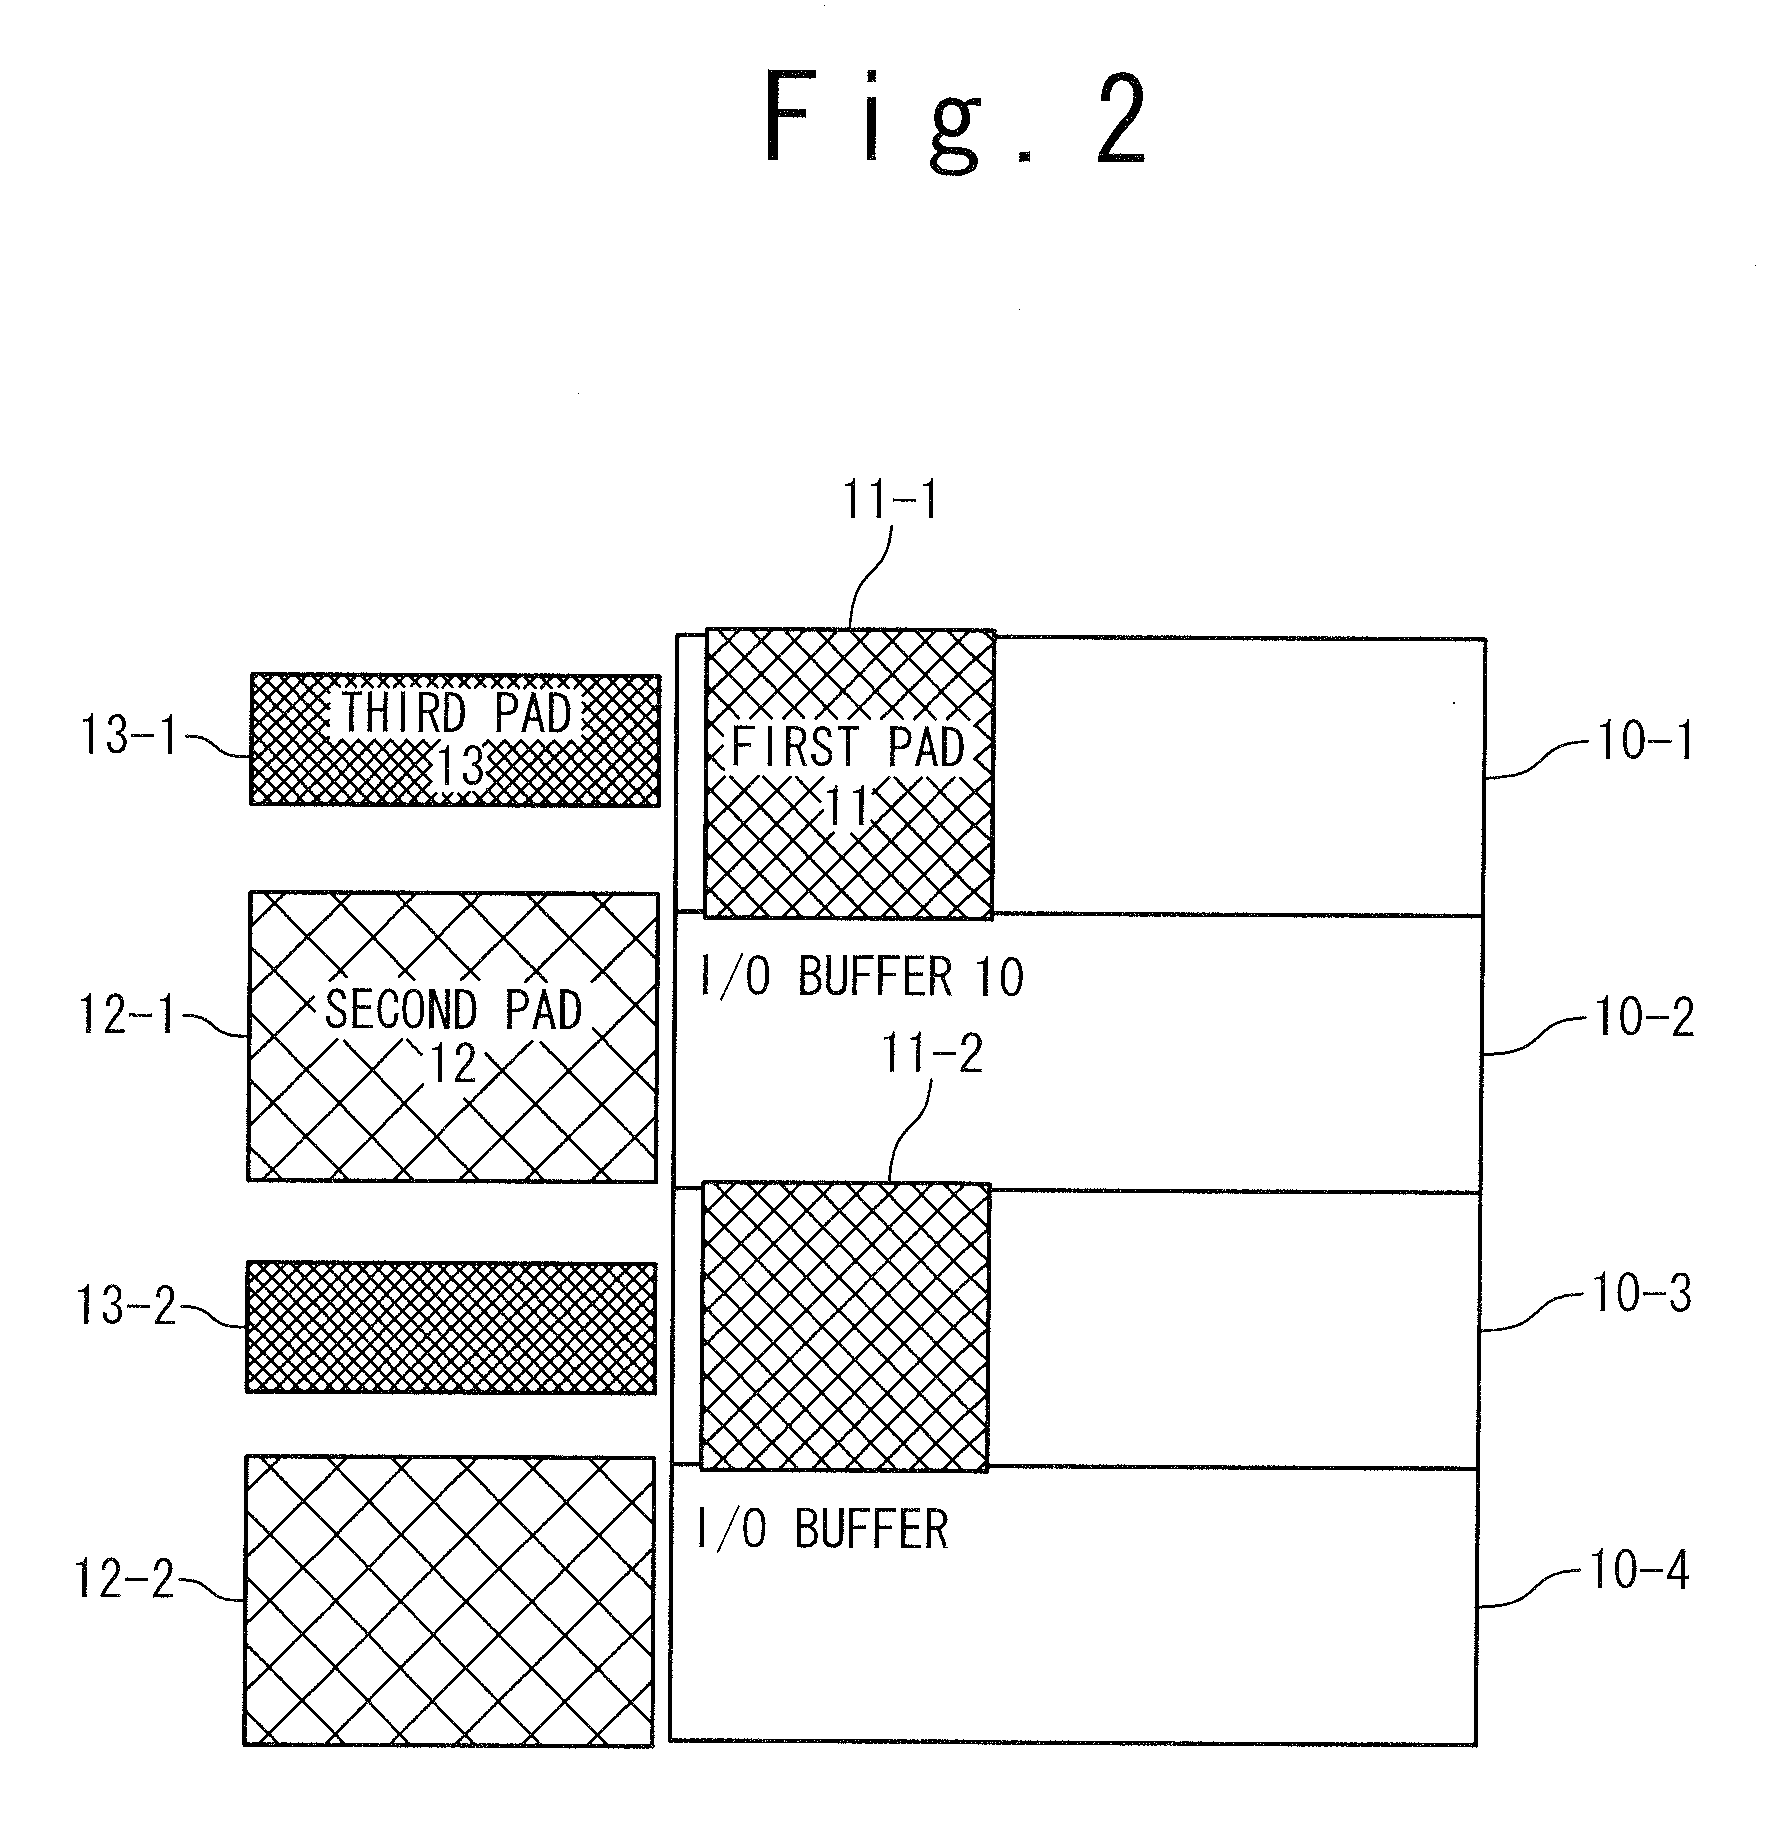 Semiconductor device having pads for bonding and probing